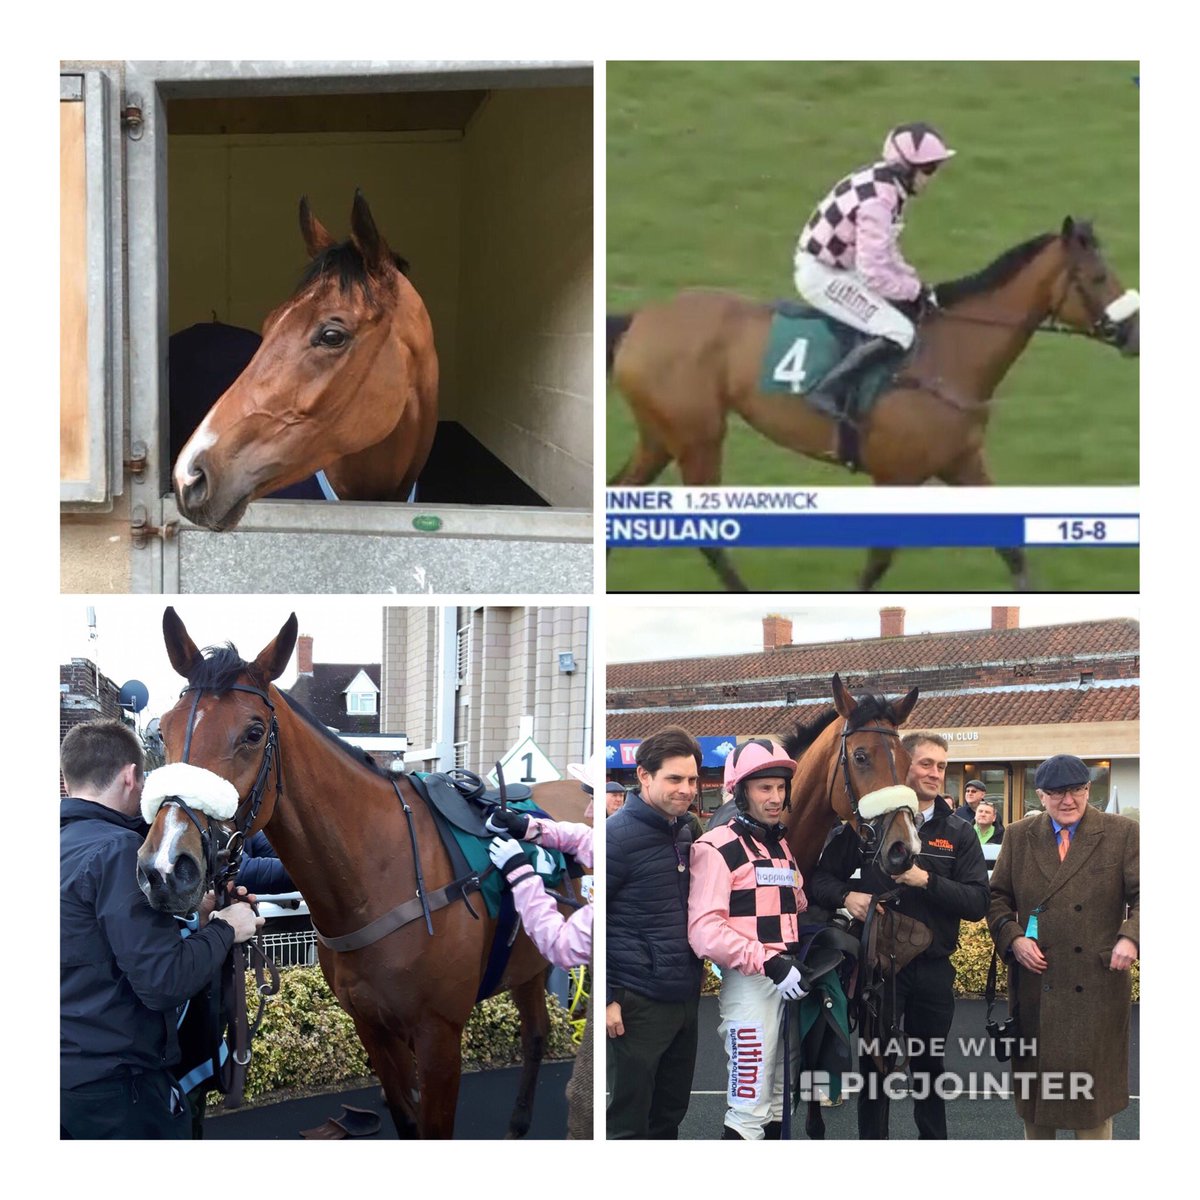 Delighted with SENSULANO's win @WarwickRaces today under @waynehutch in the colours of @JonnyHorses. A tough mare who's improving race by race. Well done and thanks to my great team back at home👍 #winner #noelwilliamsracing #churnstables #getinvolved